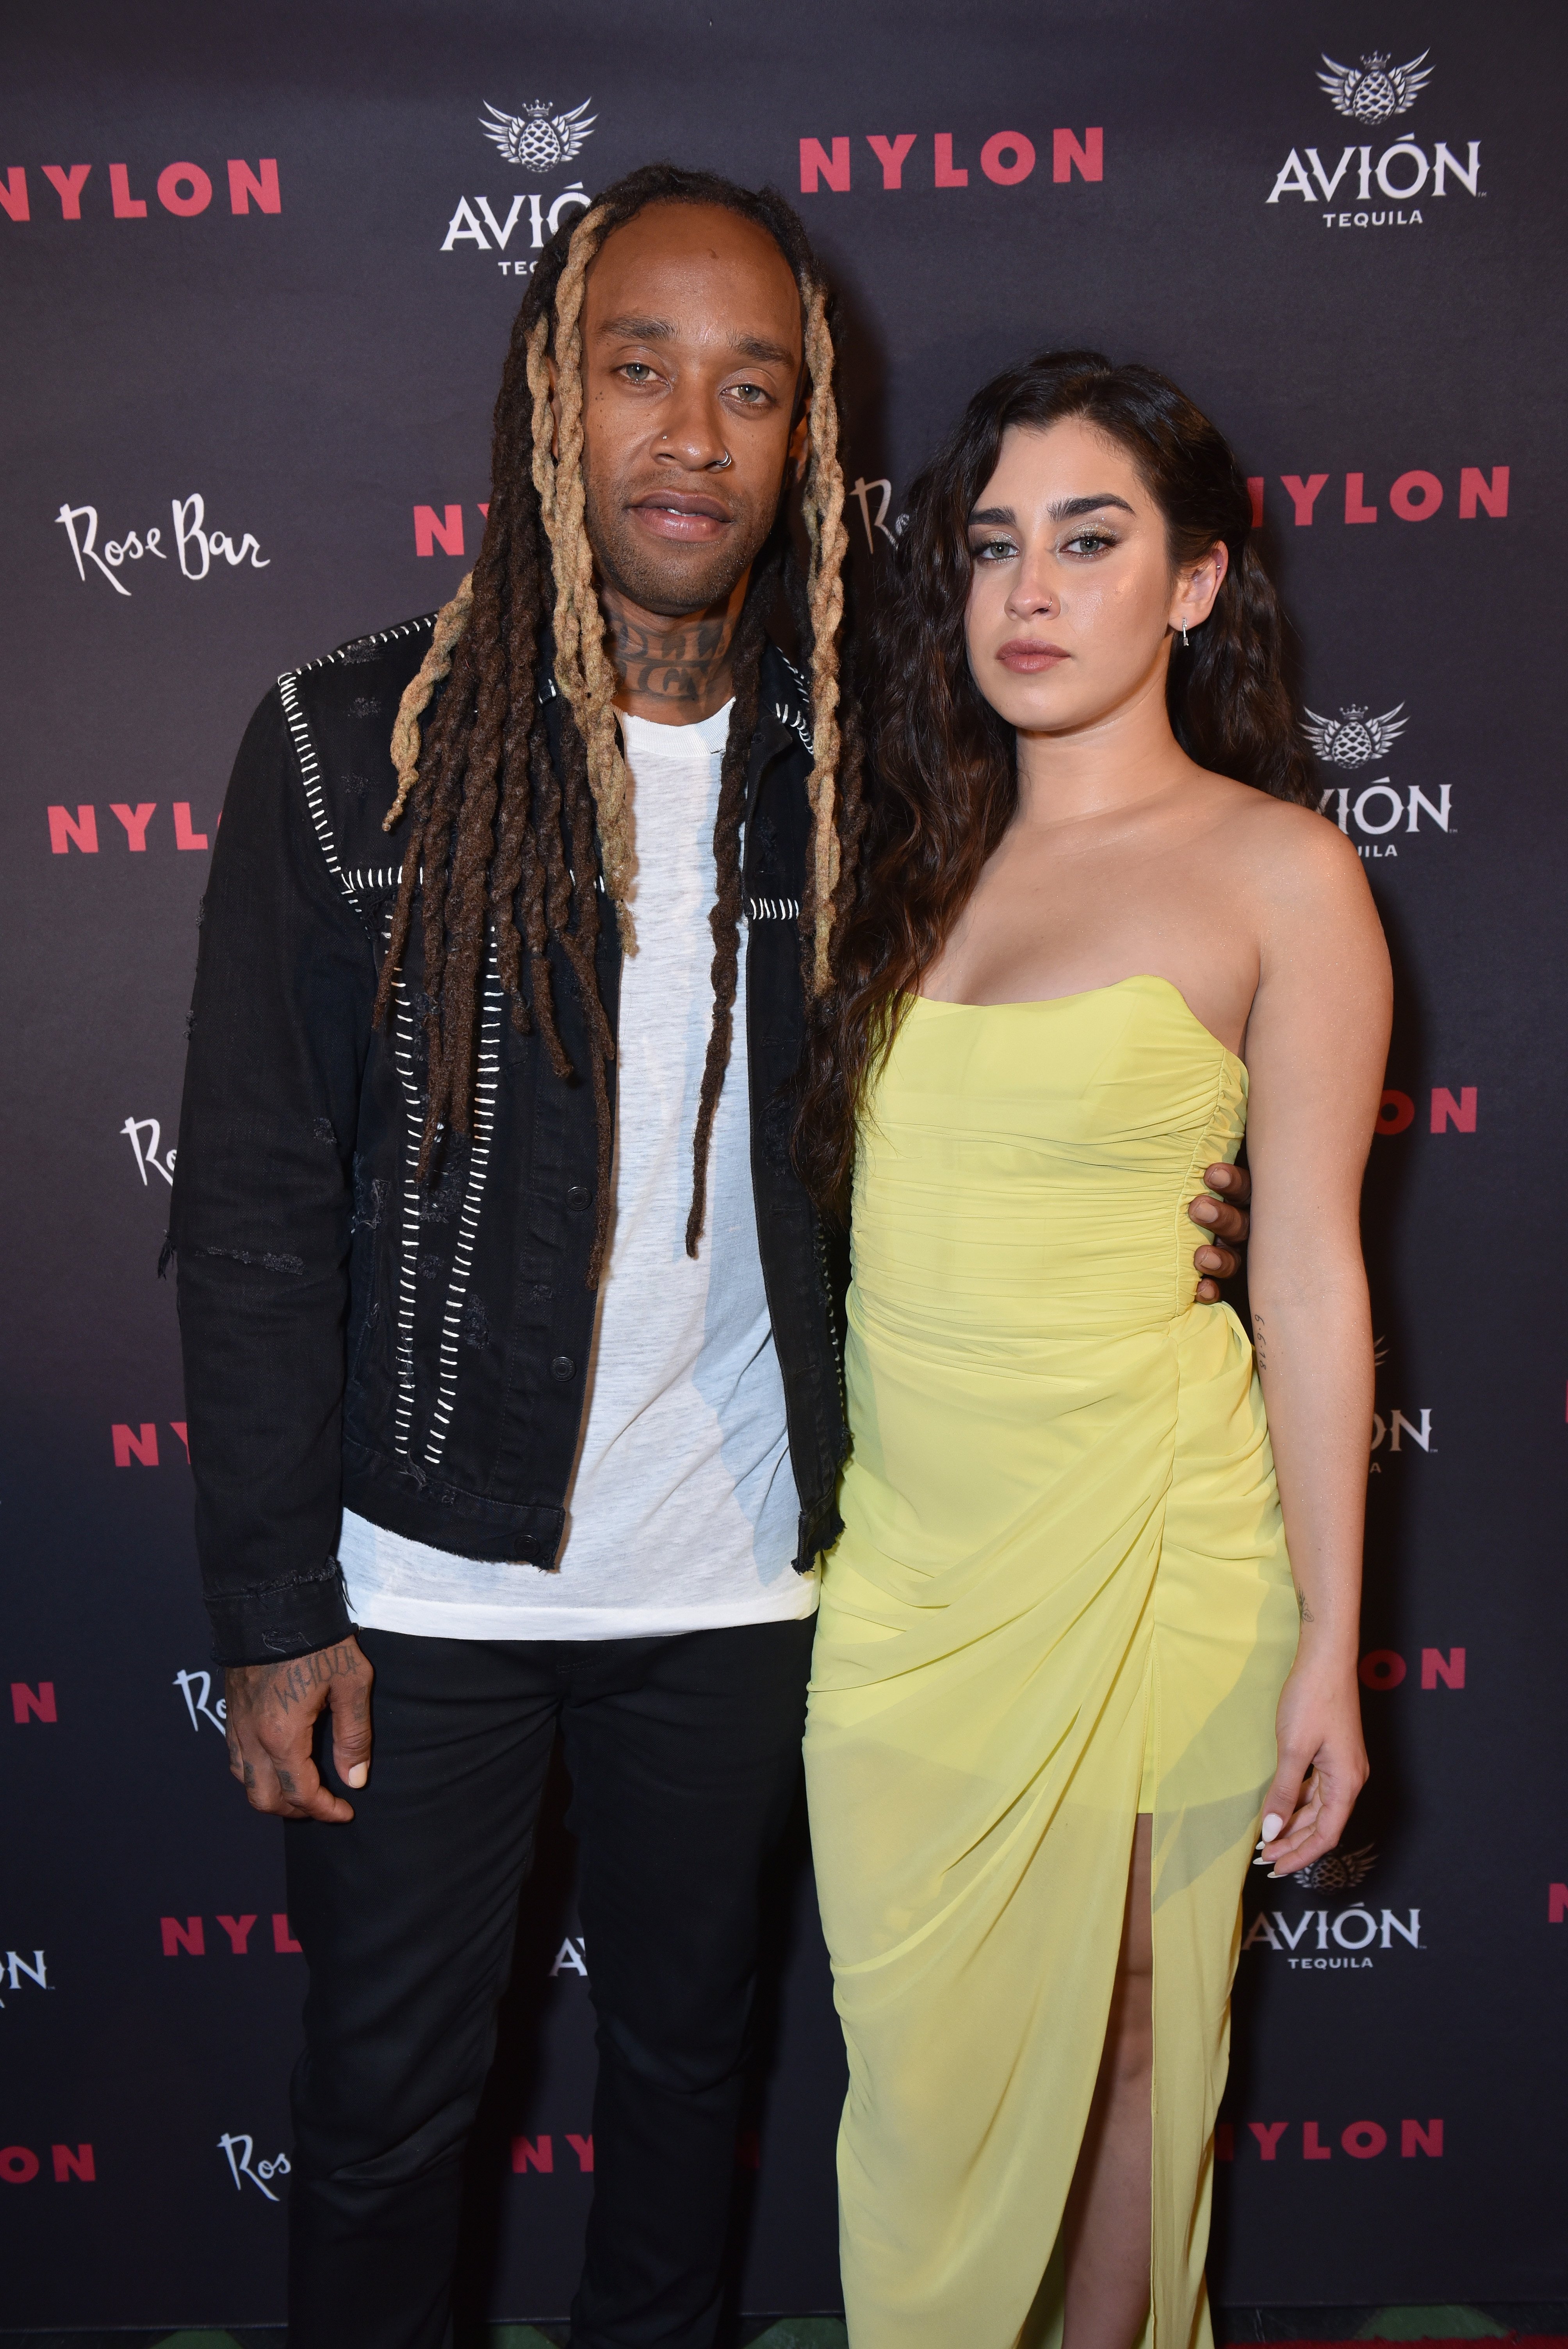 Ty Dolla $ign and Lauren Jauregui attend NYLON's Annual Rebel Fashion Party at Gramercy Park Hotel Rose Bar at Gramercy Park Hotel in New York City on September 12, 2018 | Source: Getty Images